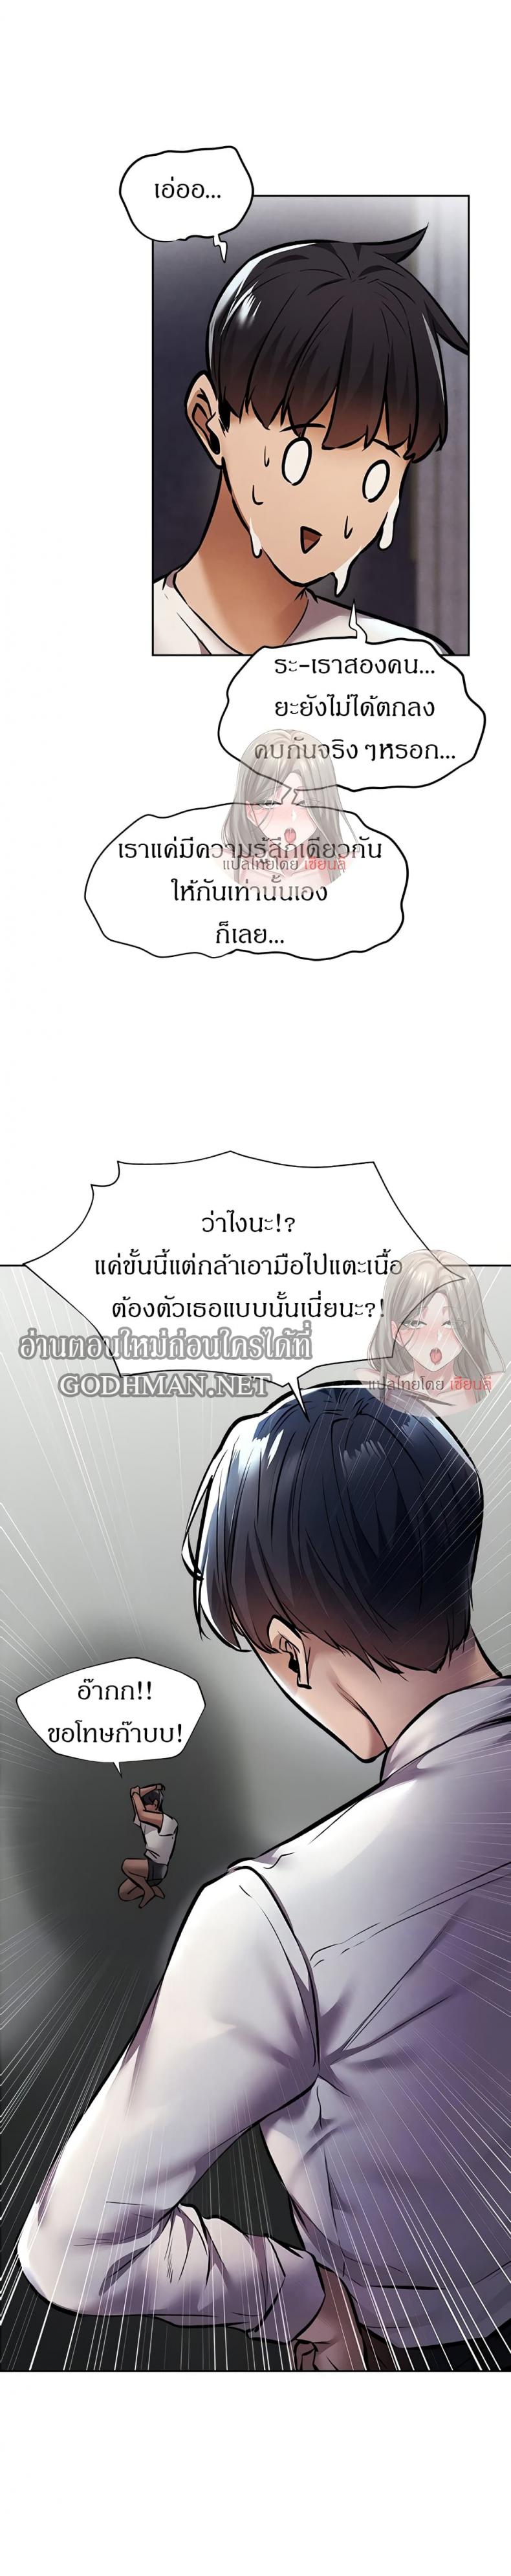 Is There an Empty Room? 56 ภาพที่ 10